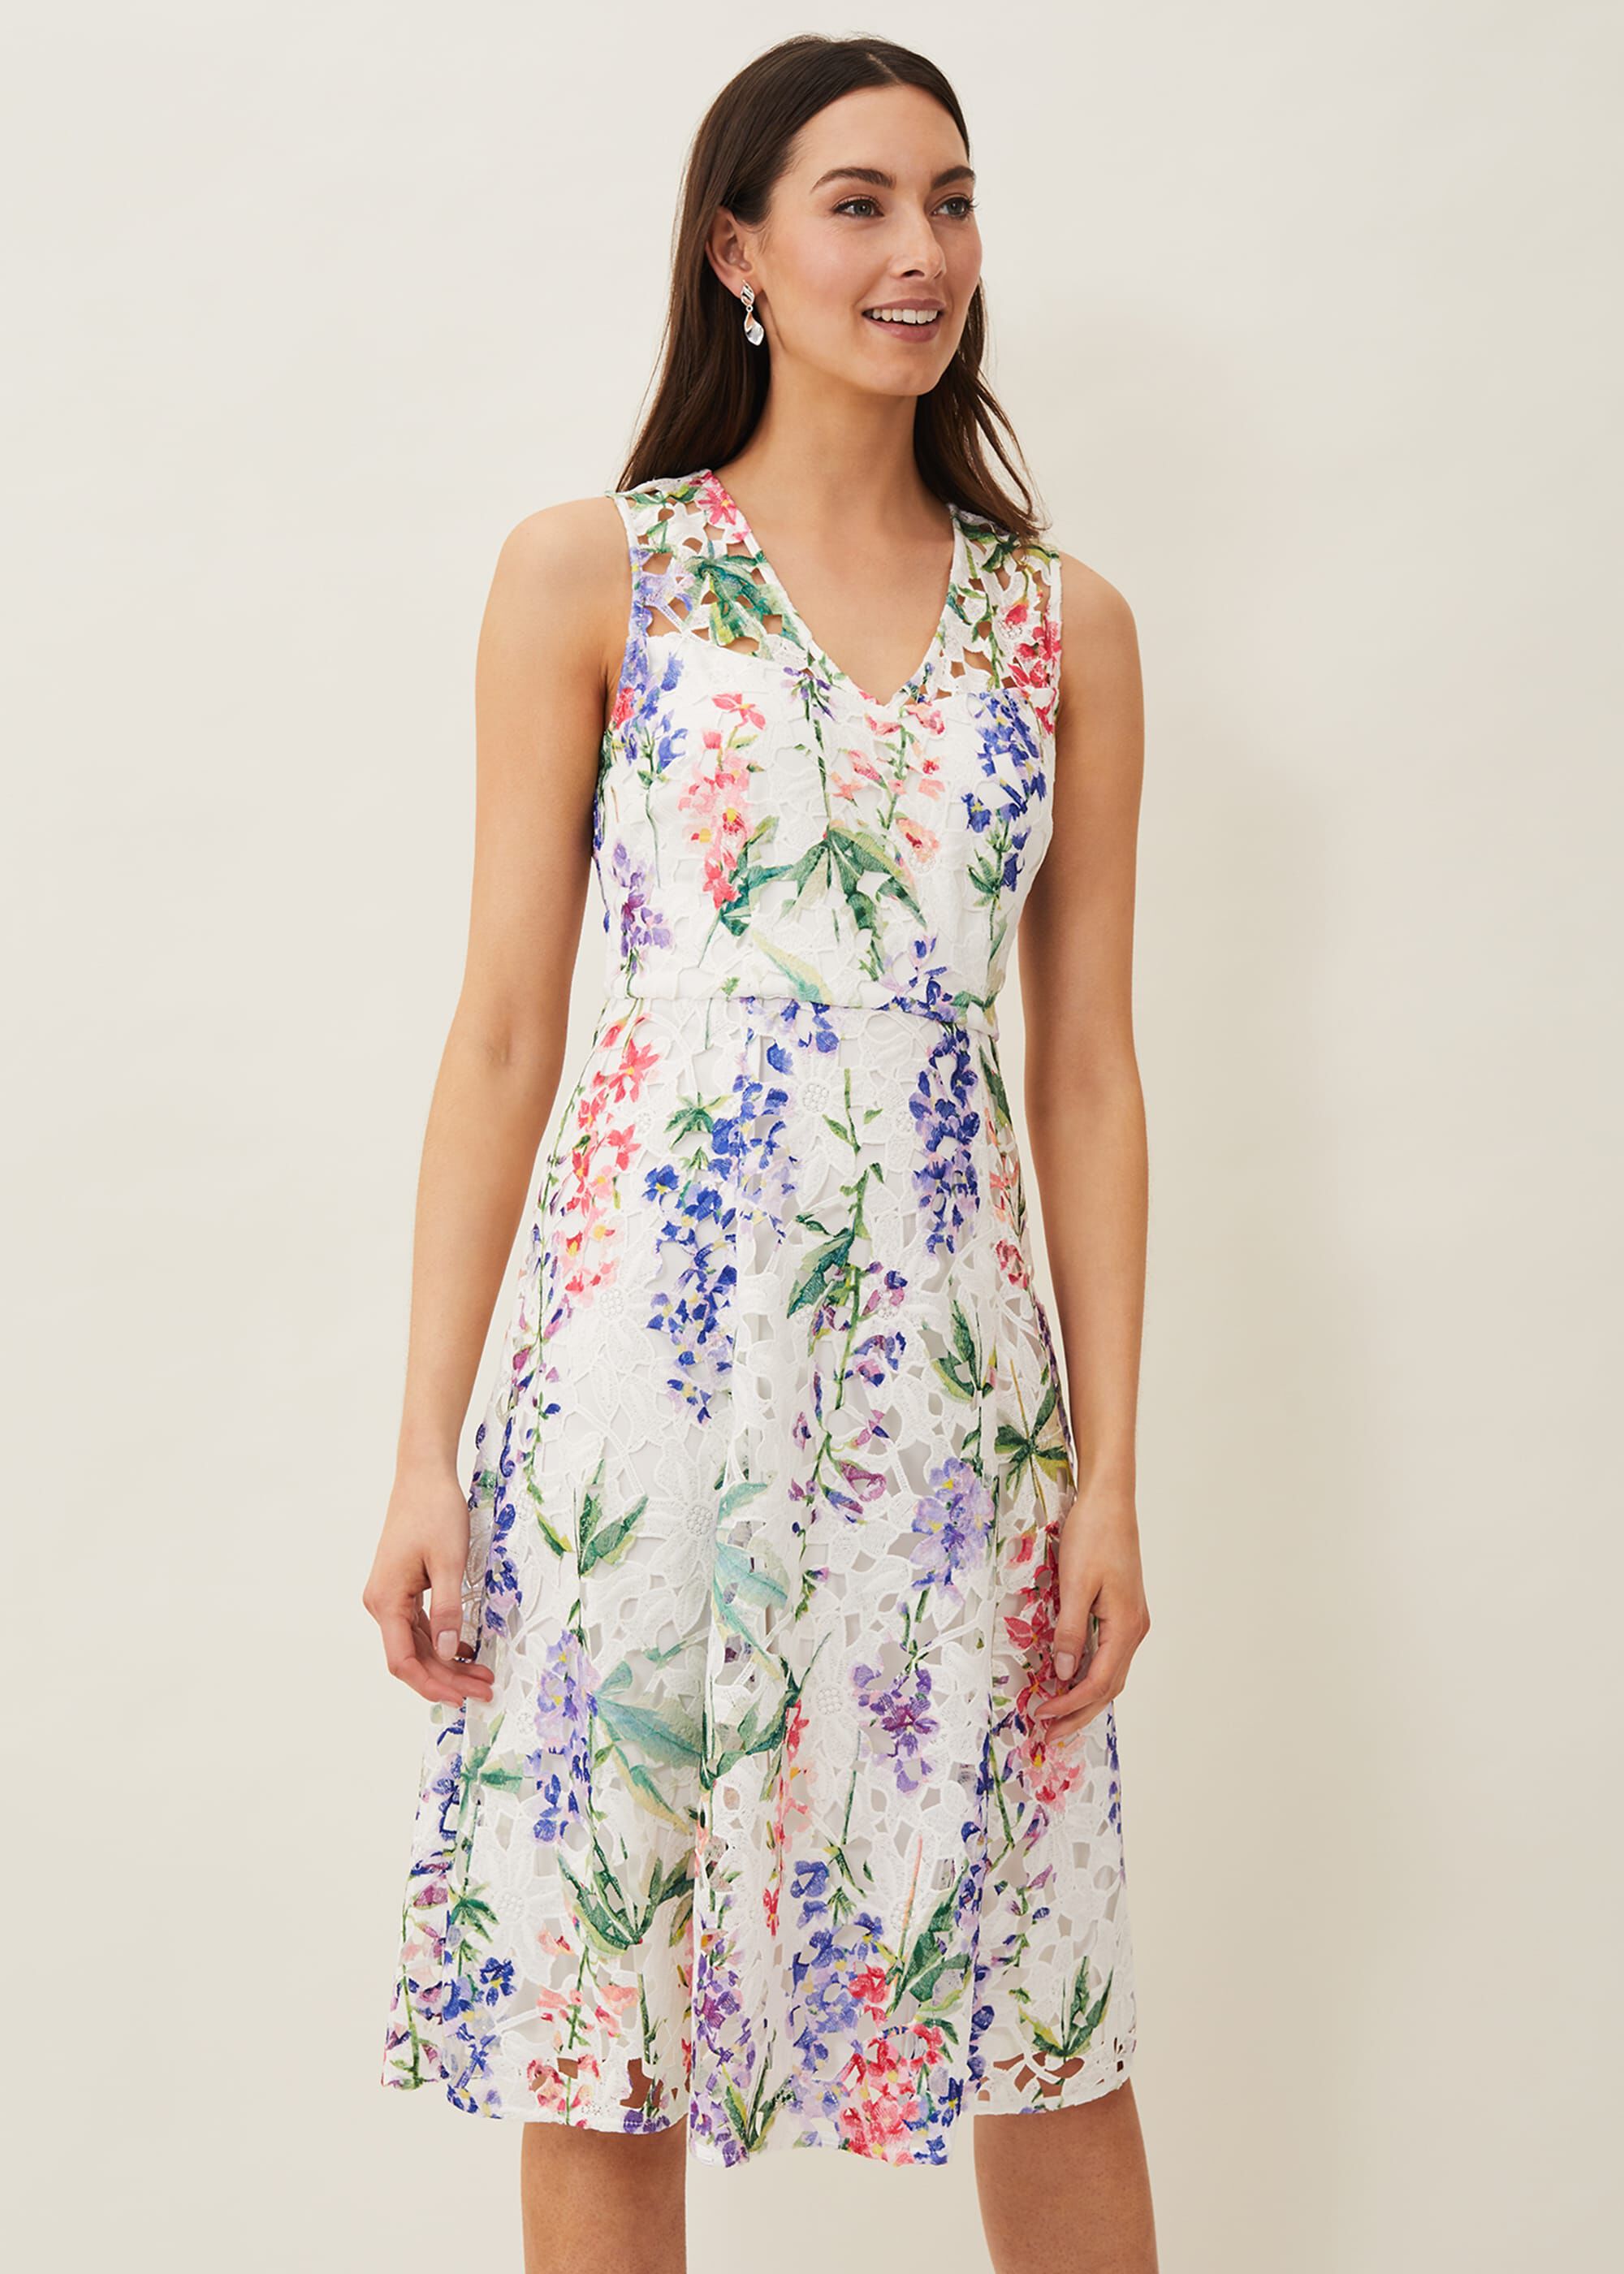 Phase Eight Summer Dresses 2019 Top Sellers, 52% OFF | www 